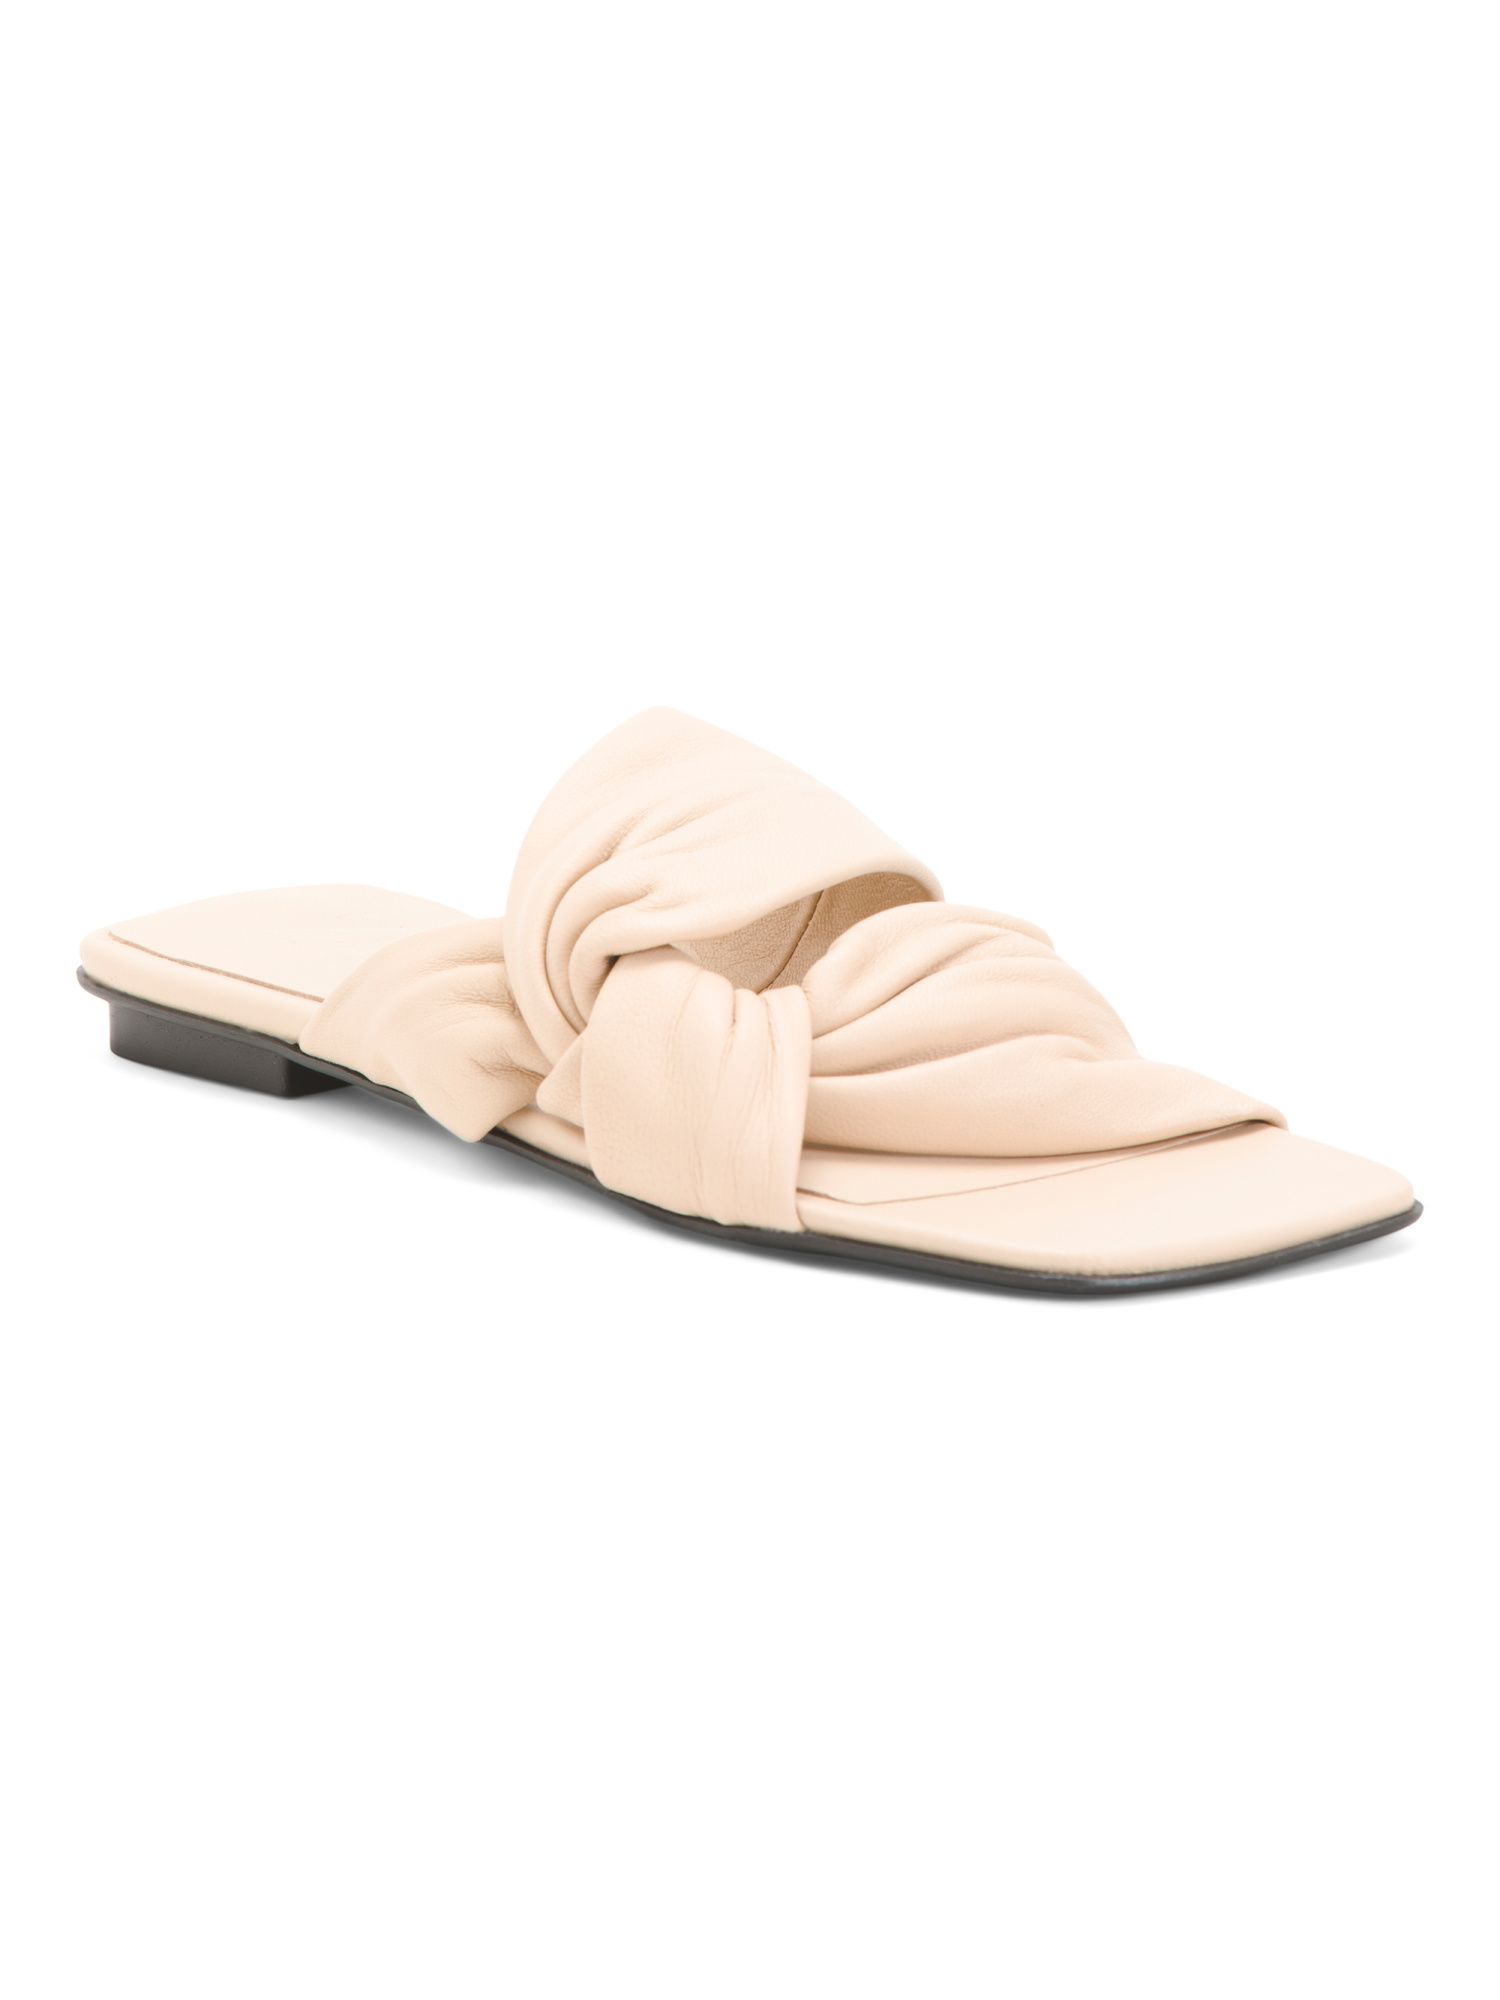 Leather Sandals With Knot Detail | TJ Maxx